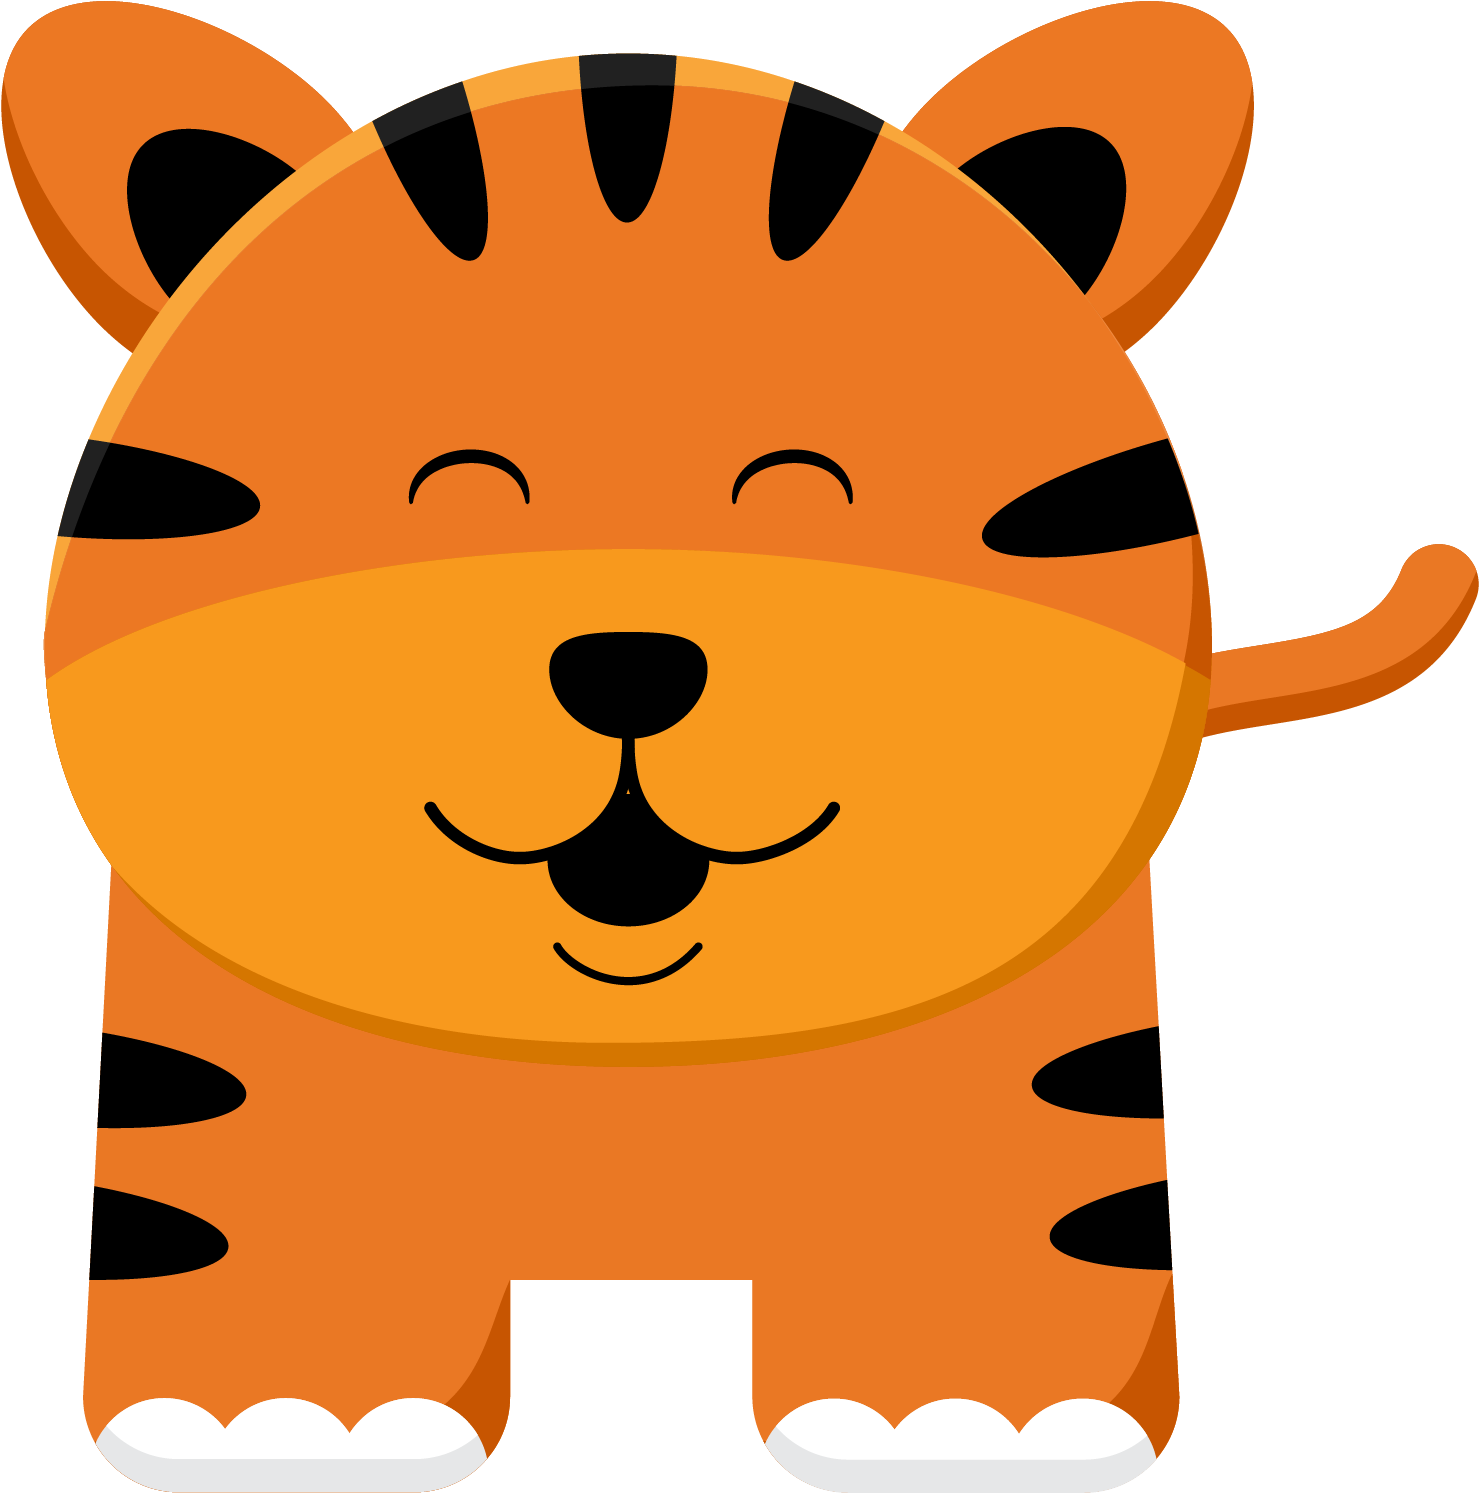 A Cartoon Tiger With Its Eyes Closed